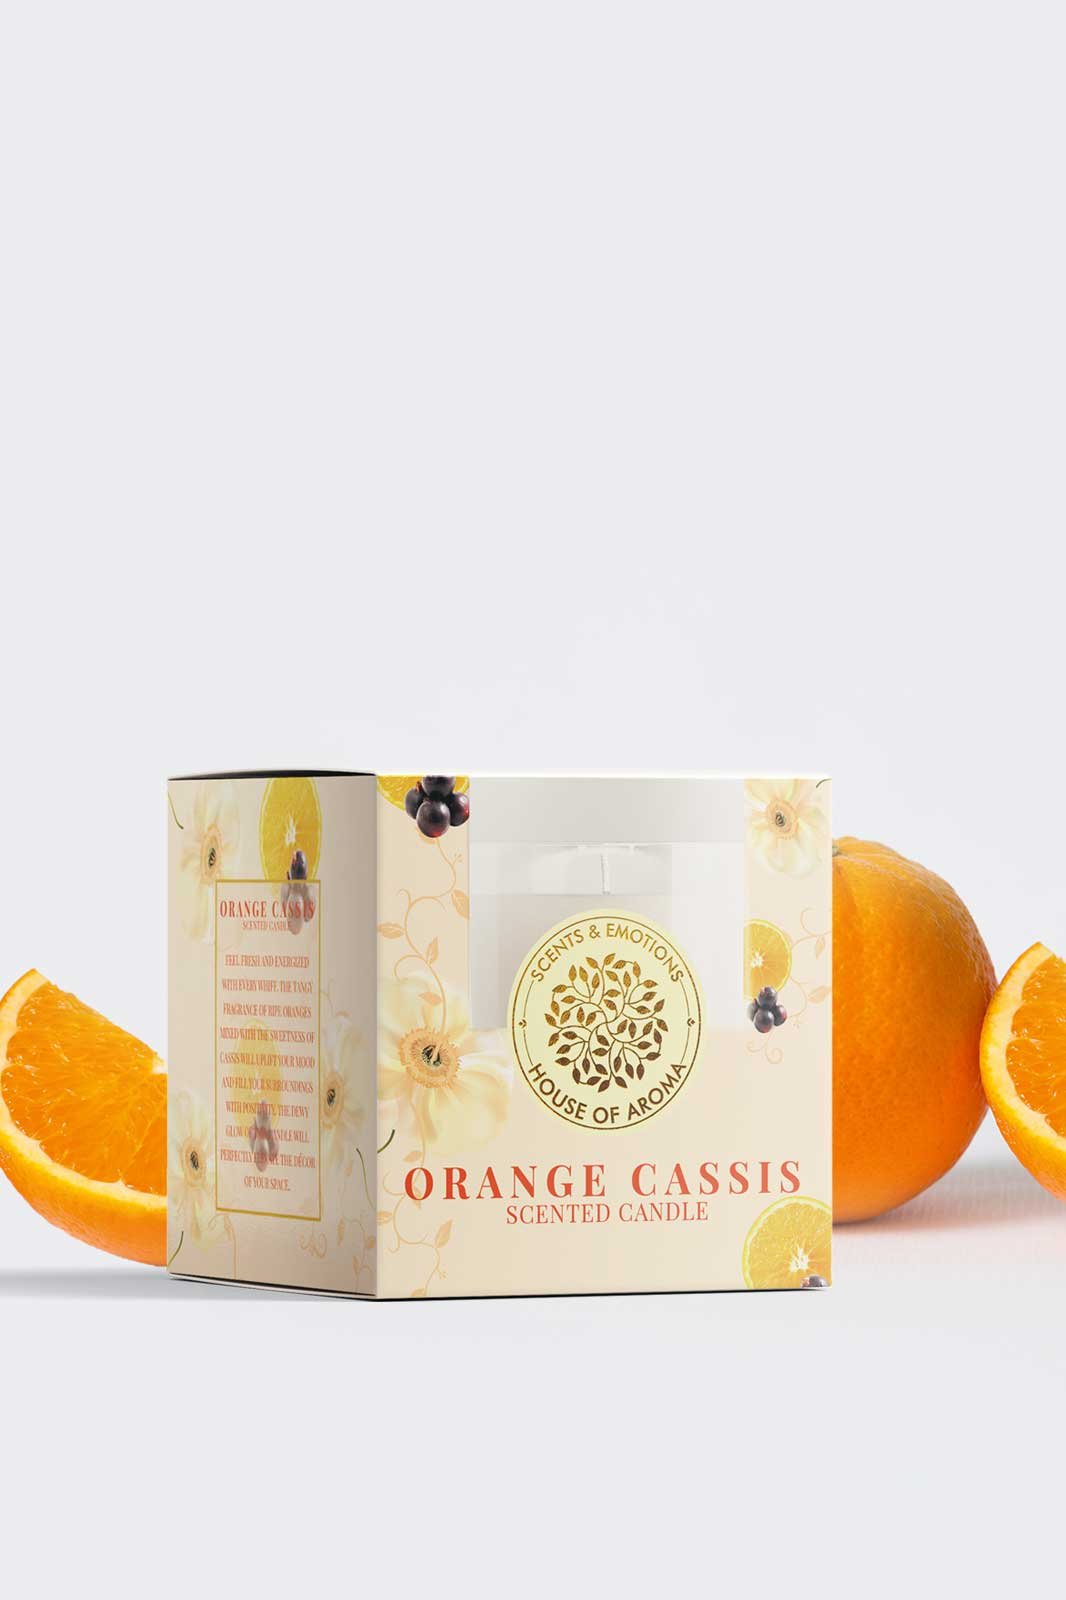 orange candle, orange glass candle, orange scented candle, scented candles near me, best scented candles India, best orange scented candles, House of Aroma, scented candles online, home decor scented candles, organic scented candles, online scented candles, home decor candle, buy scented candles online, room decor candles, best scented candles online, organic candles India, aroma candles online India, organic scents for candles, organic soy candles, natural scented beeswax candles, benefits scented candles, aroma candles buy online, scented candles for home decor, best scents of candles, organic natural scented candles, home decor aroma candles, scented candles order online, organic soy candle wax, best home scented candles, best organic scented candles, organic scented oils, best fragrance scented candles, organic aroma for candles, organic soy for candles, aroma scented candles, scented candle brand, aroma diffuser candle, essential oil for scented candles, aroma candles gift set, best aroma candles in India